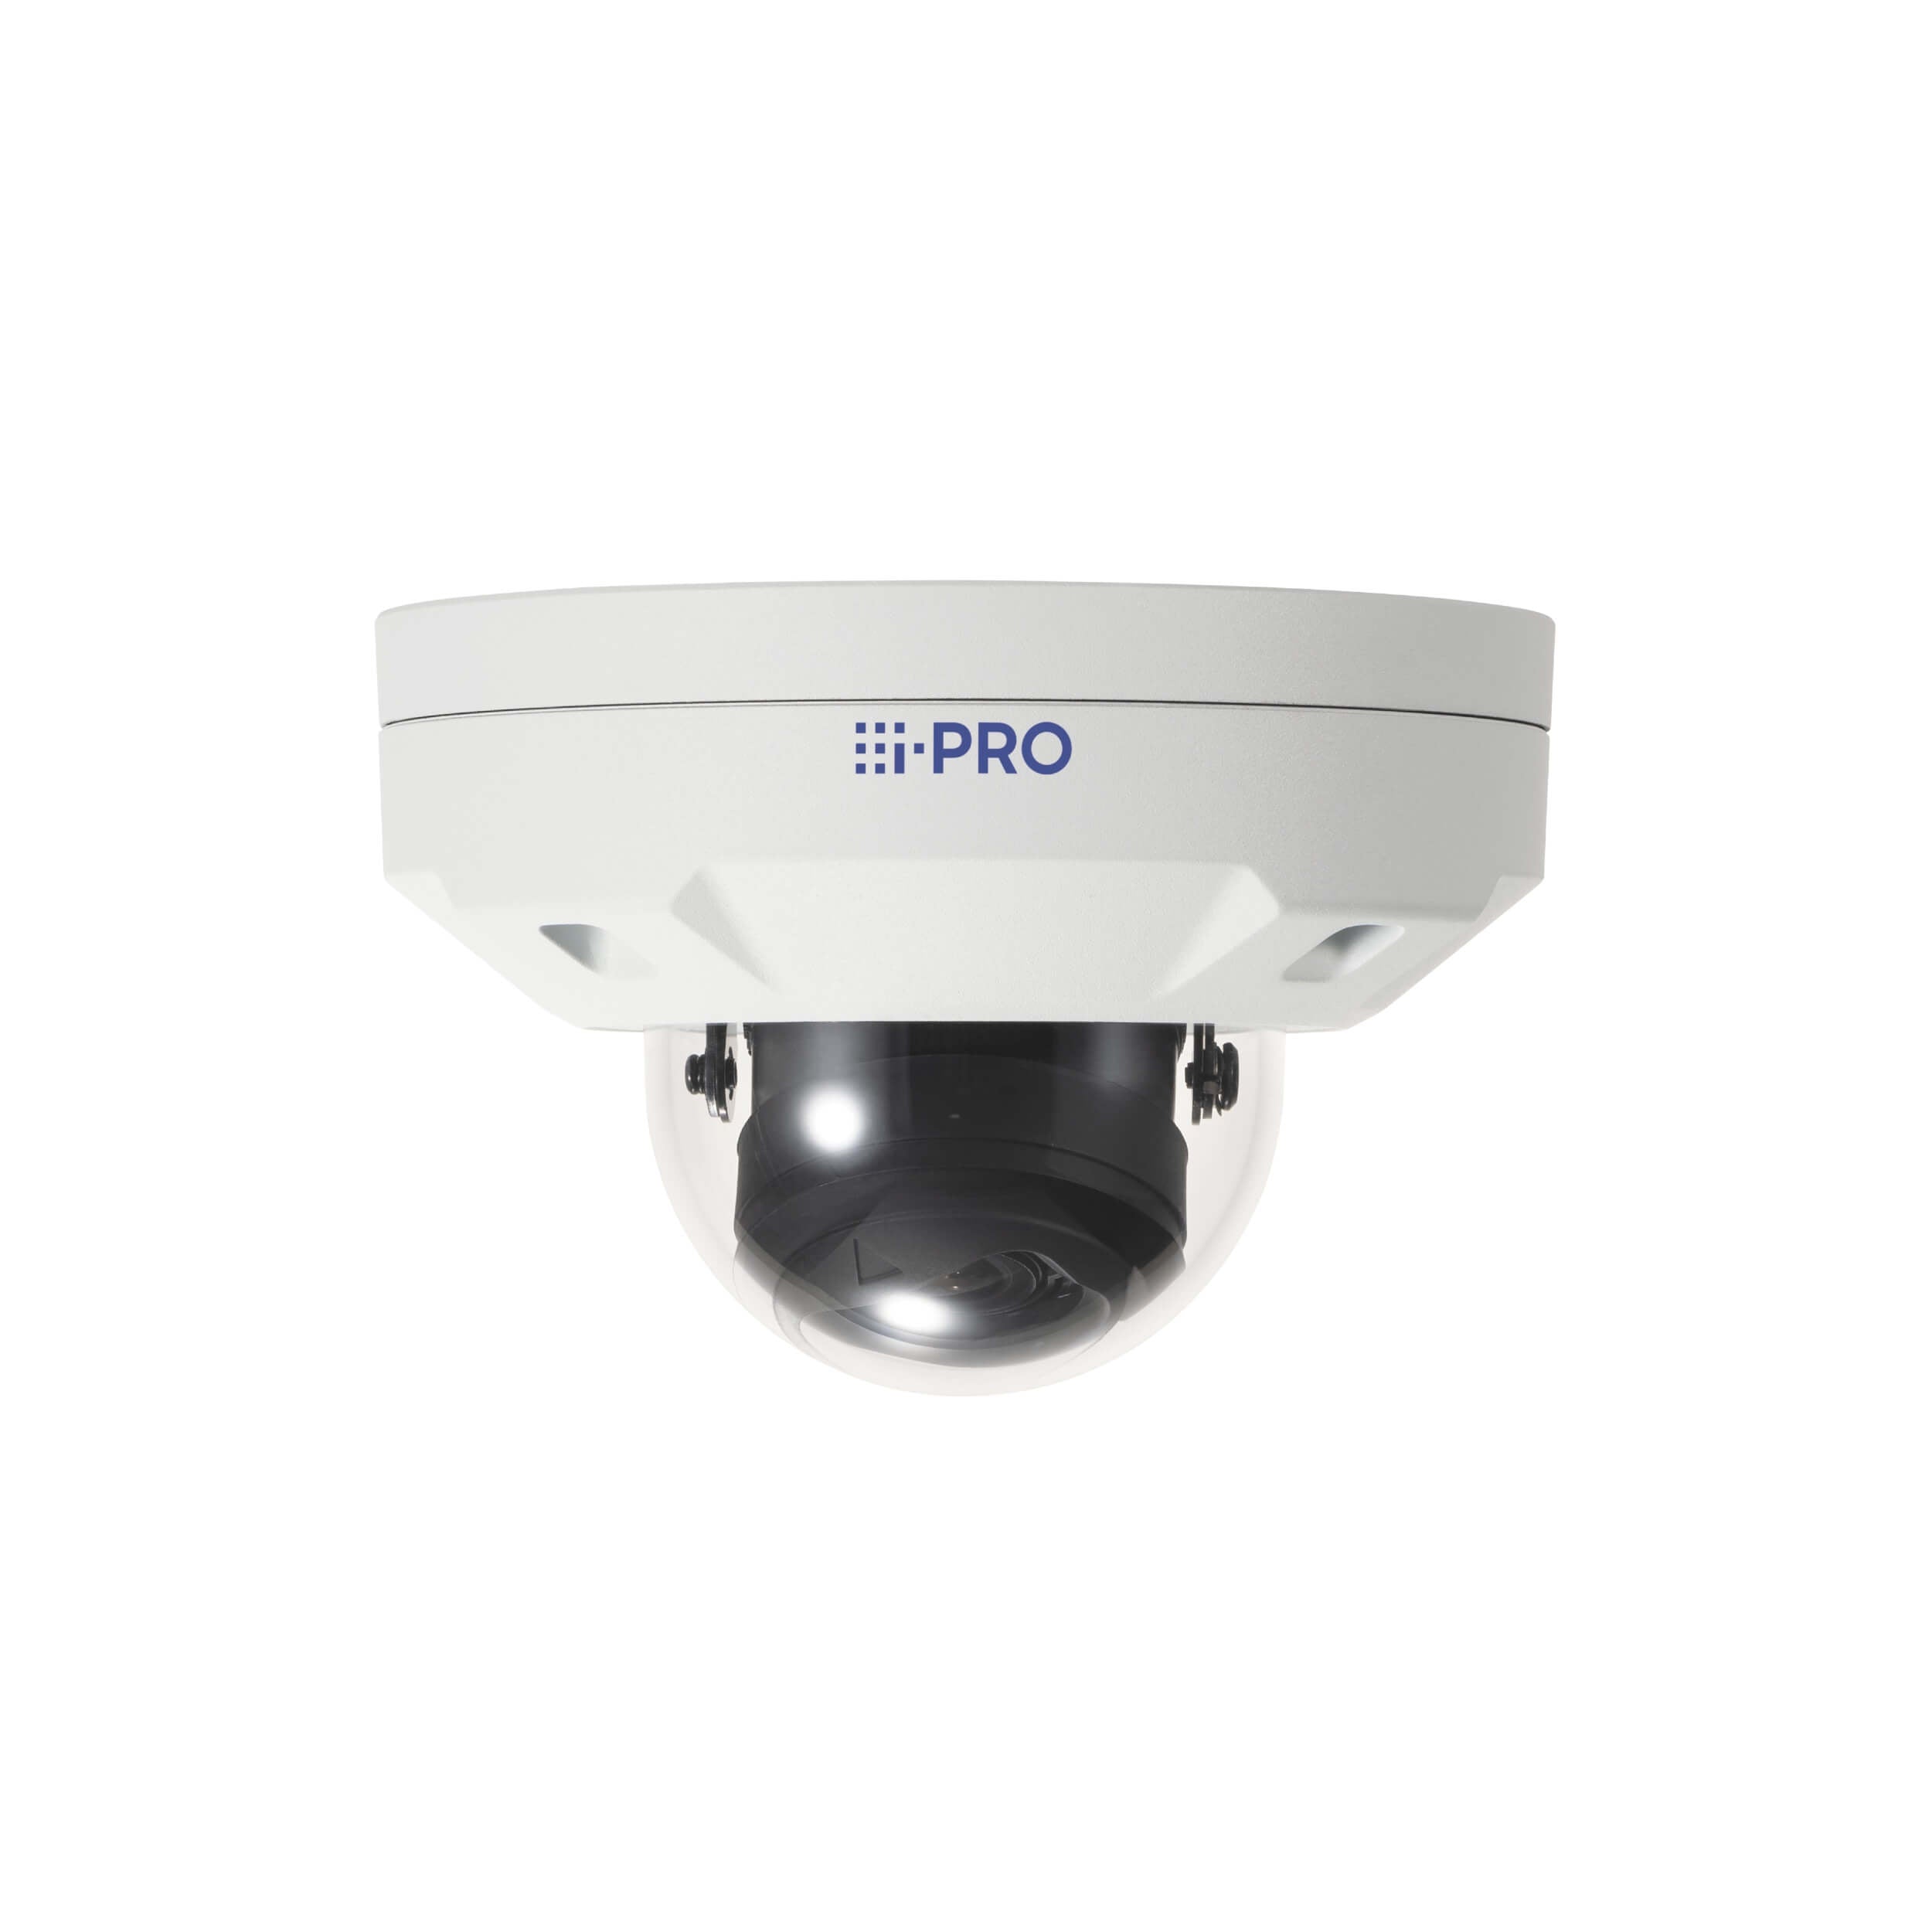 Panasonic WV-S25700-V2LN1 4K Vandal Resistant Outdoor Dome Network Camera with AI Engine with 4.3-8.6mm Lens